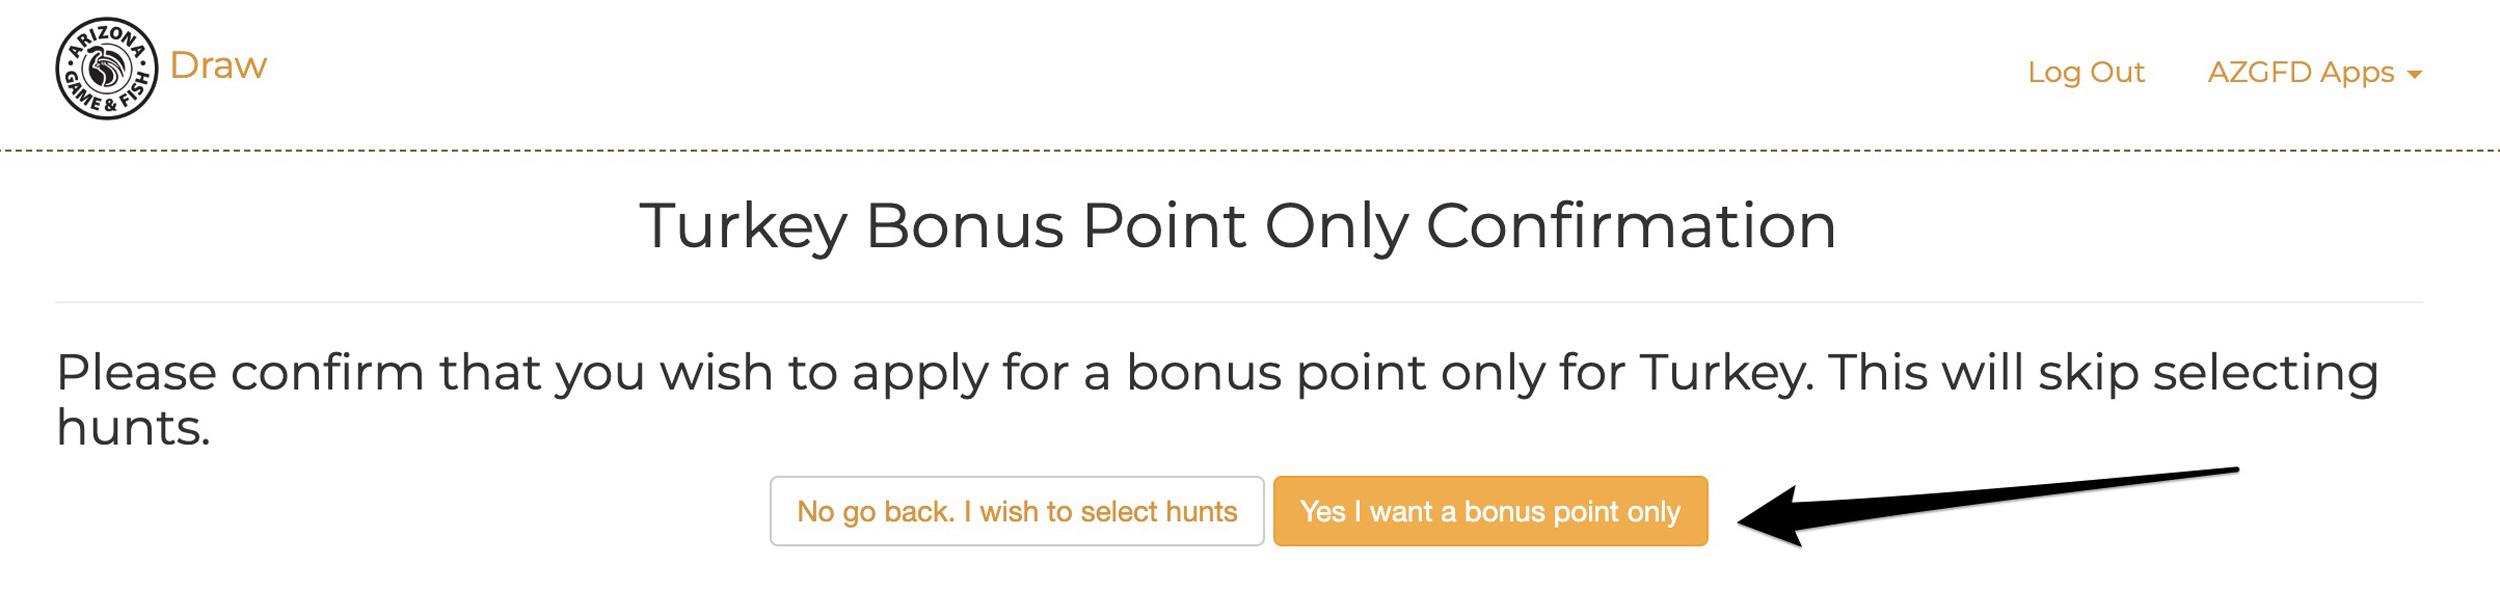 Confirming that you want to purchase a bonus point only for this Arizona application